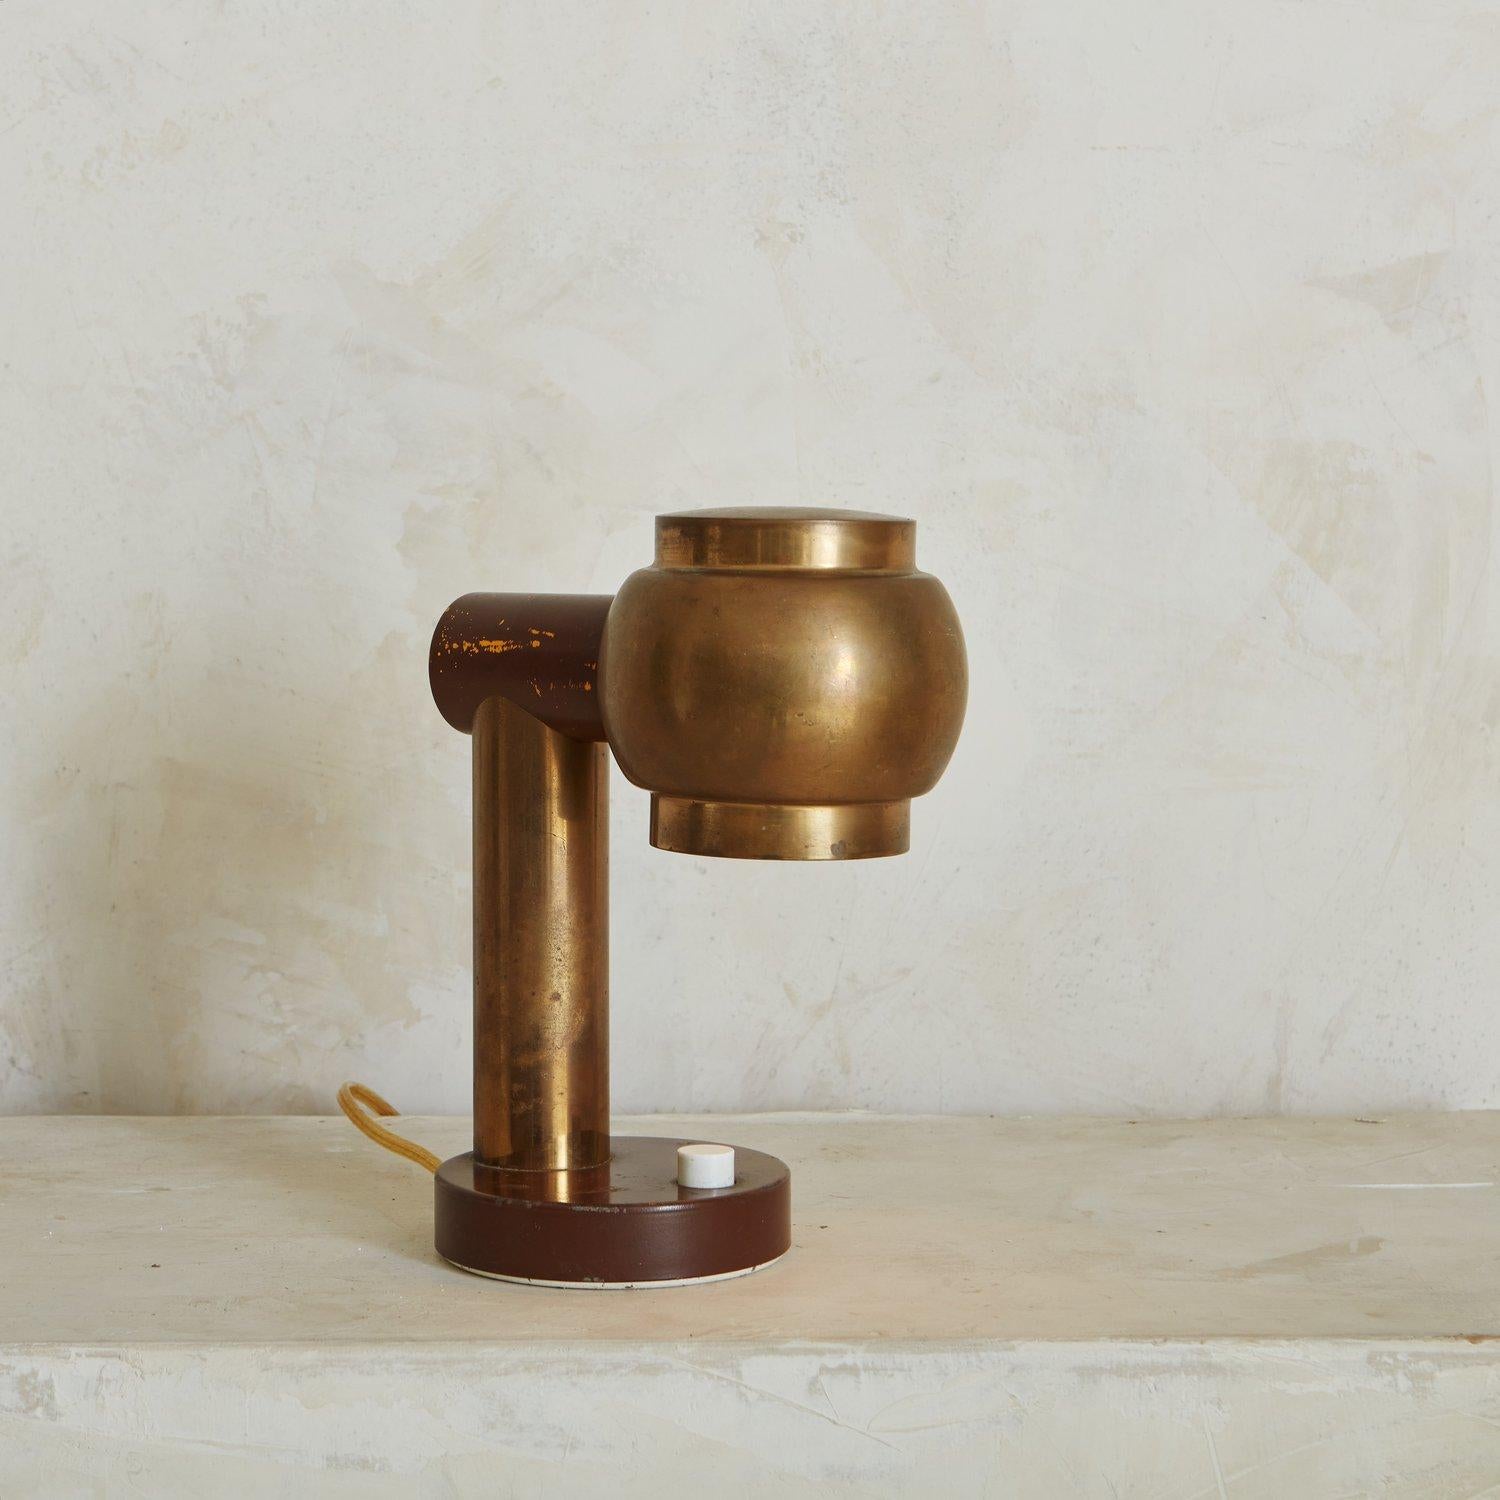 A handsome brass desk lamp featuring a thick cylindrical body and a round sculptural shade. This lamp has a round base with a white acrylic power button and is partially painted a beautiful maroon hue. We love the patina on this vintage beauty.